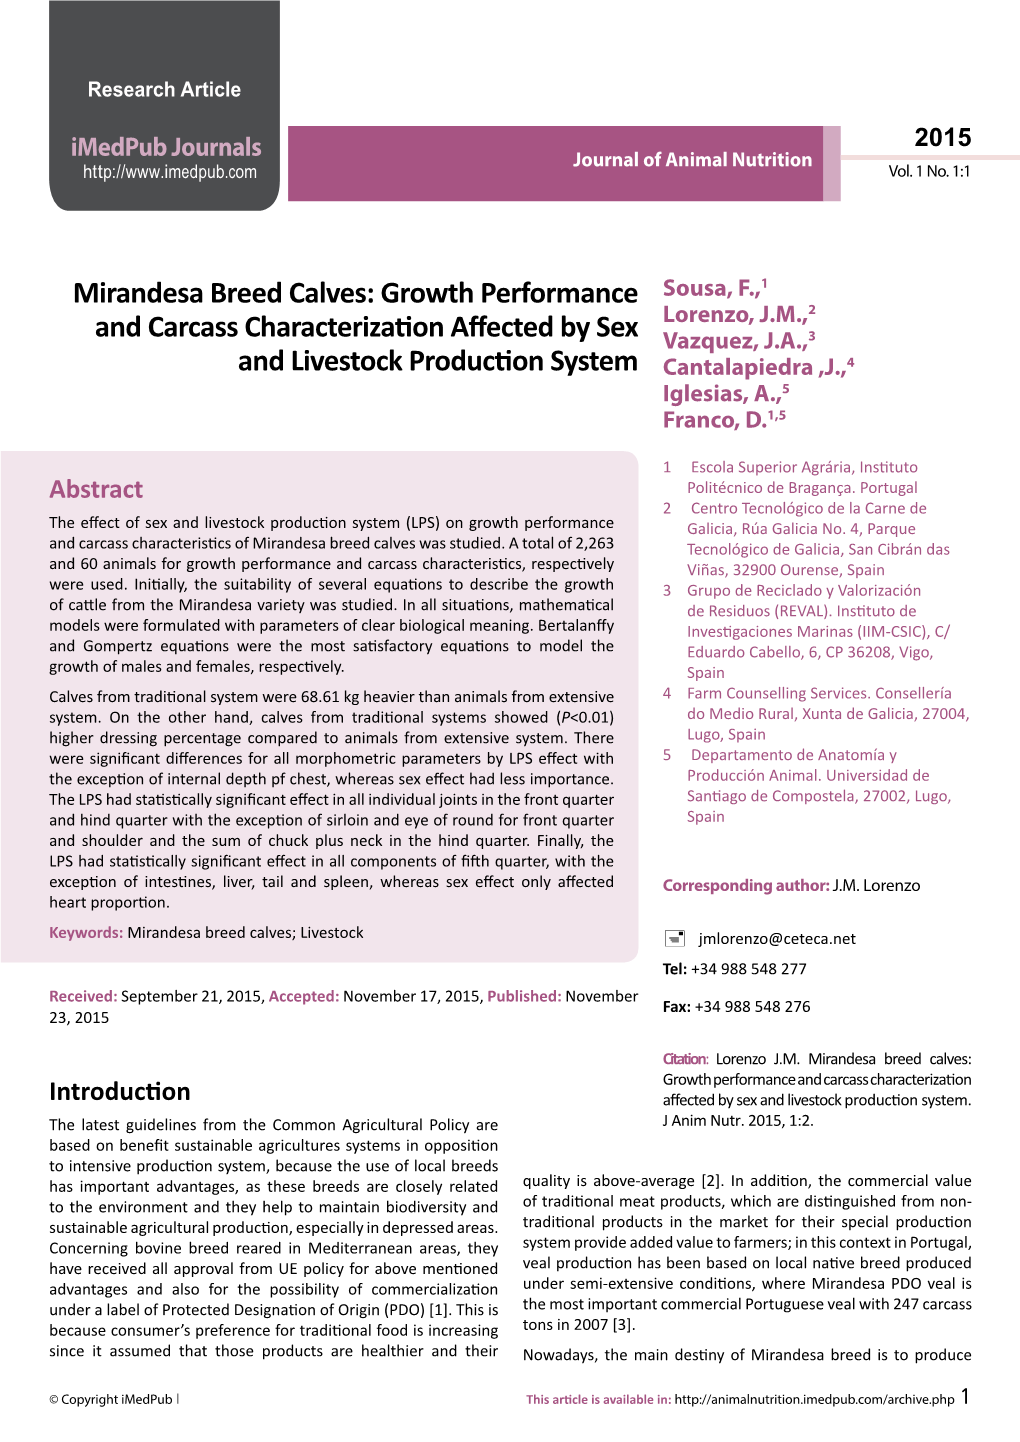 Mirandesa Breed Calves: Growth Performance and Carcass Characterization Introduction Affected by Sex and Livestock Production System